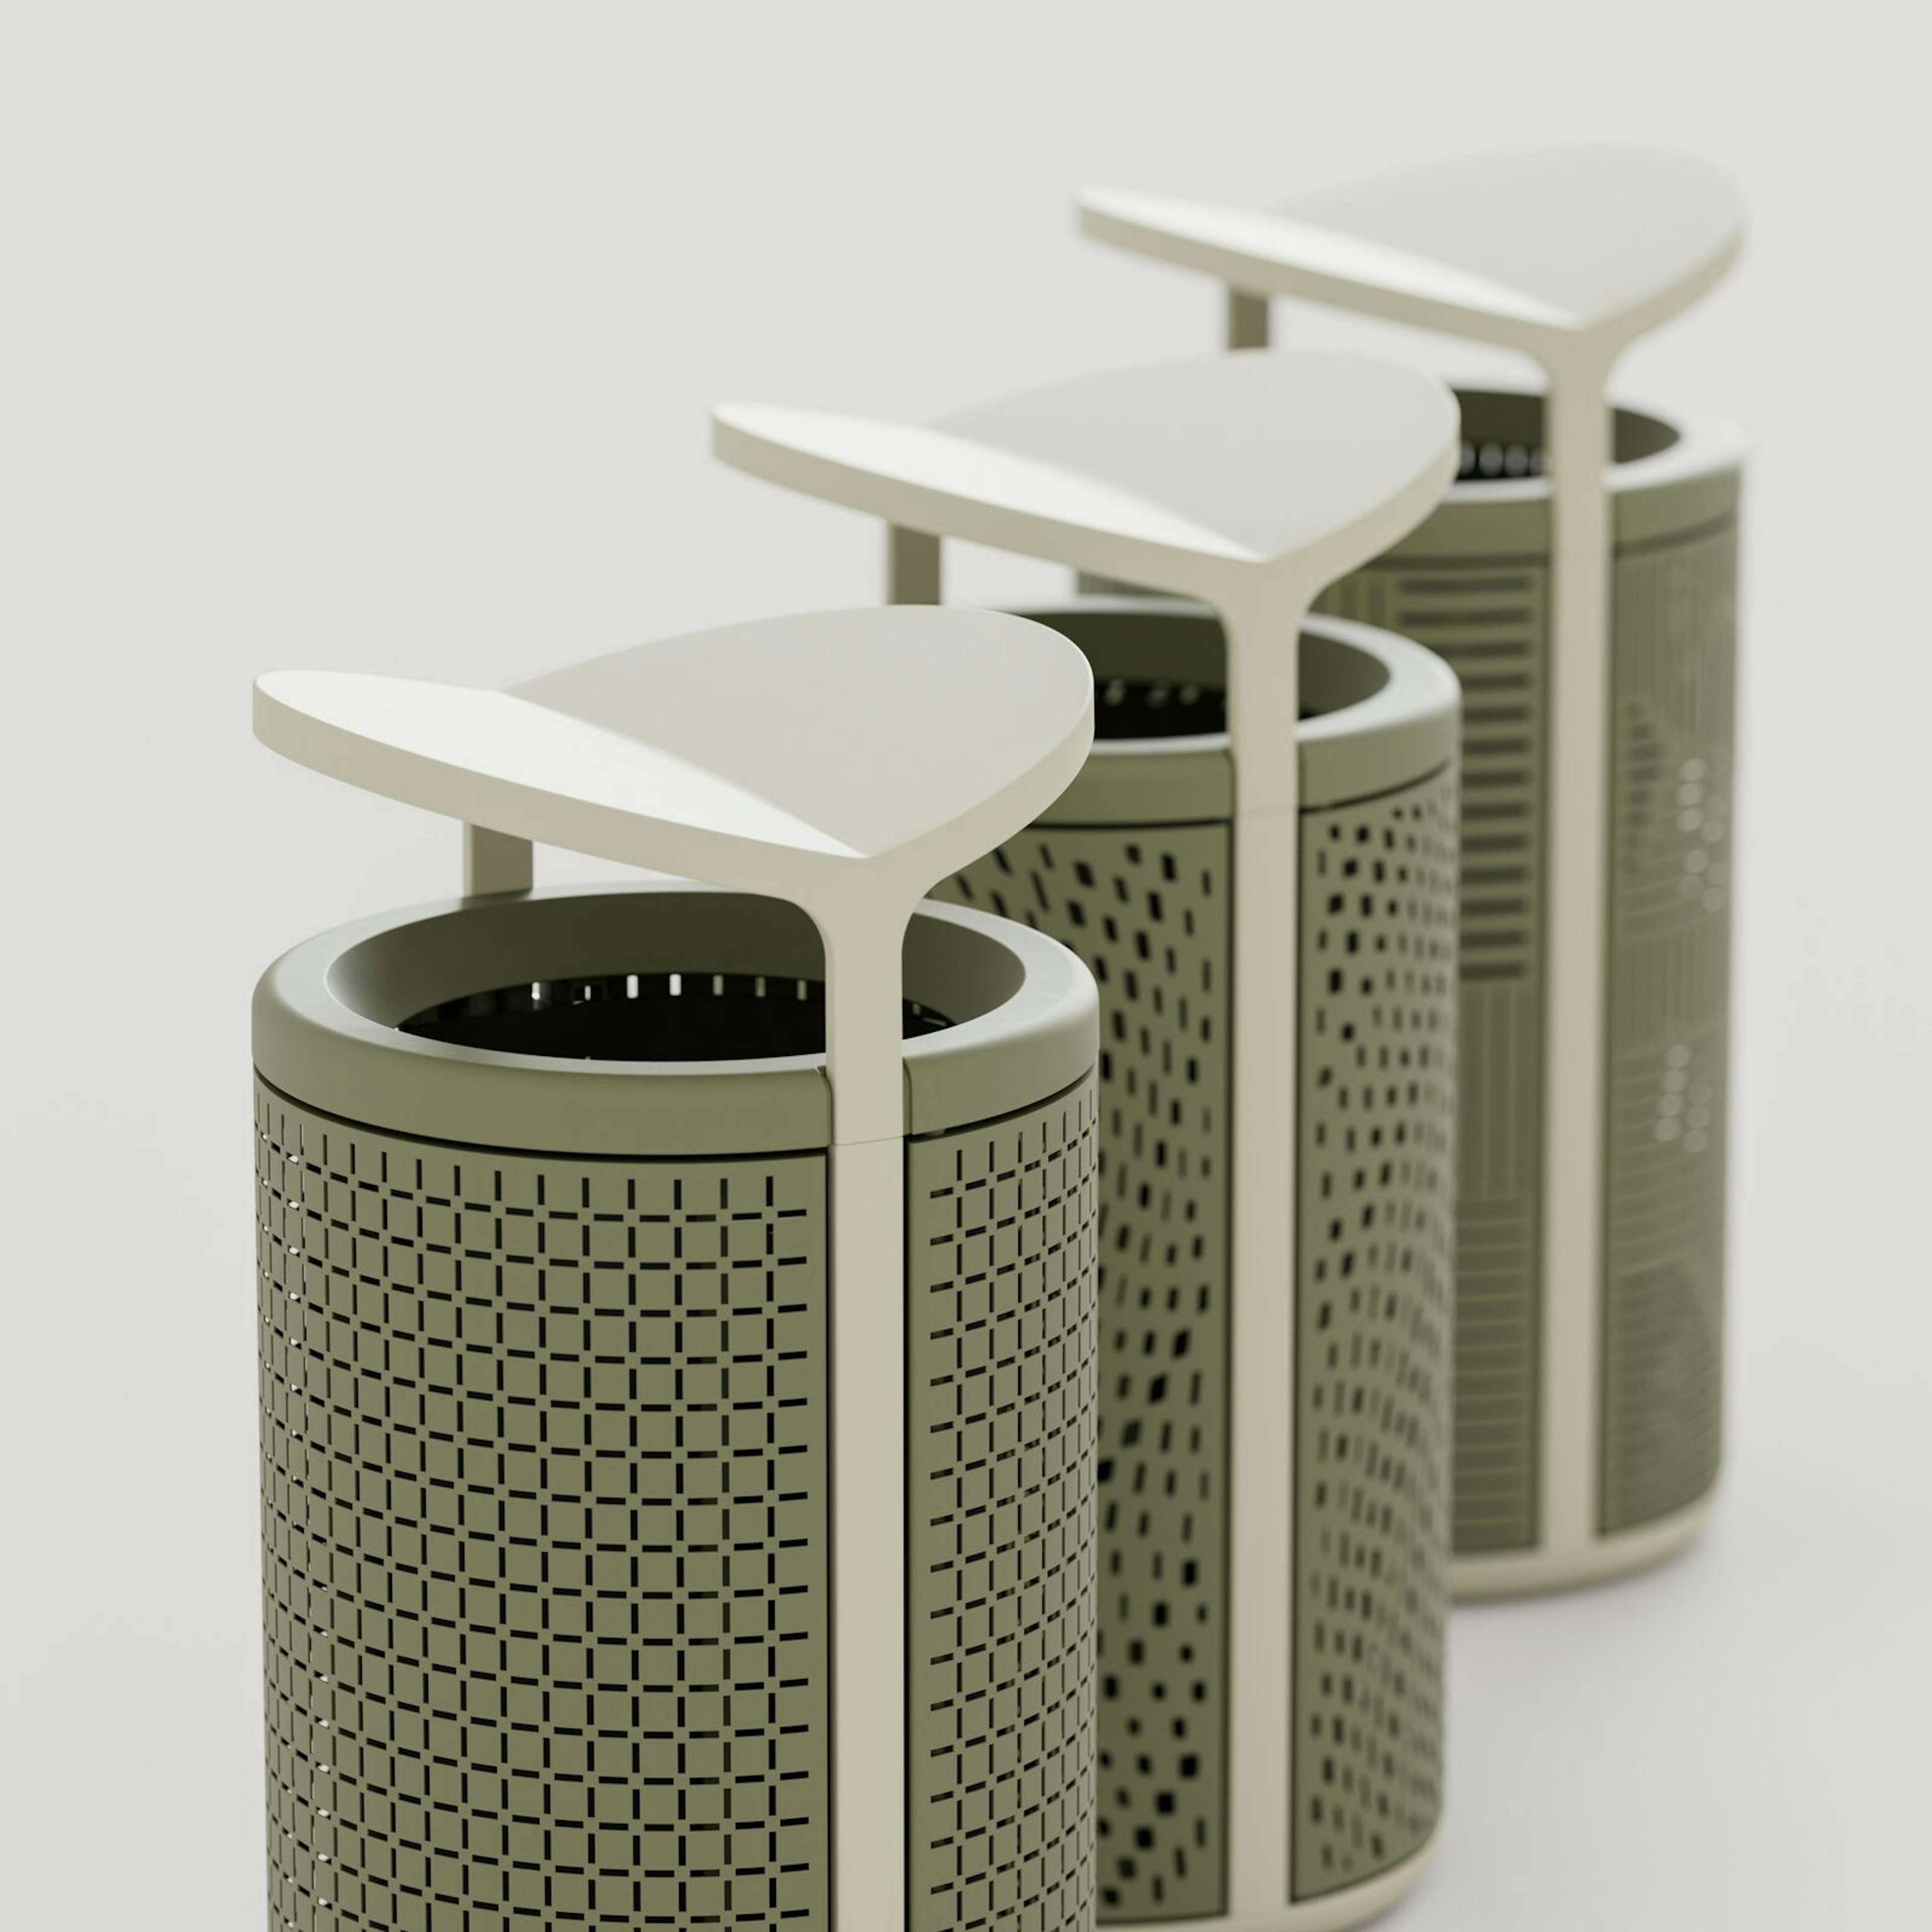 Tonyo Litter & Recycling Receptacle: Lichen Texture + Olive Texture 